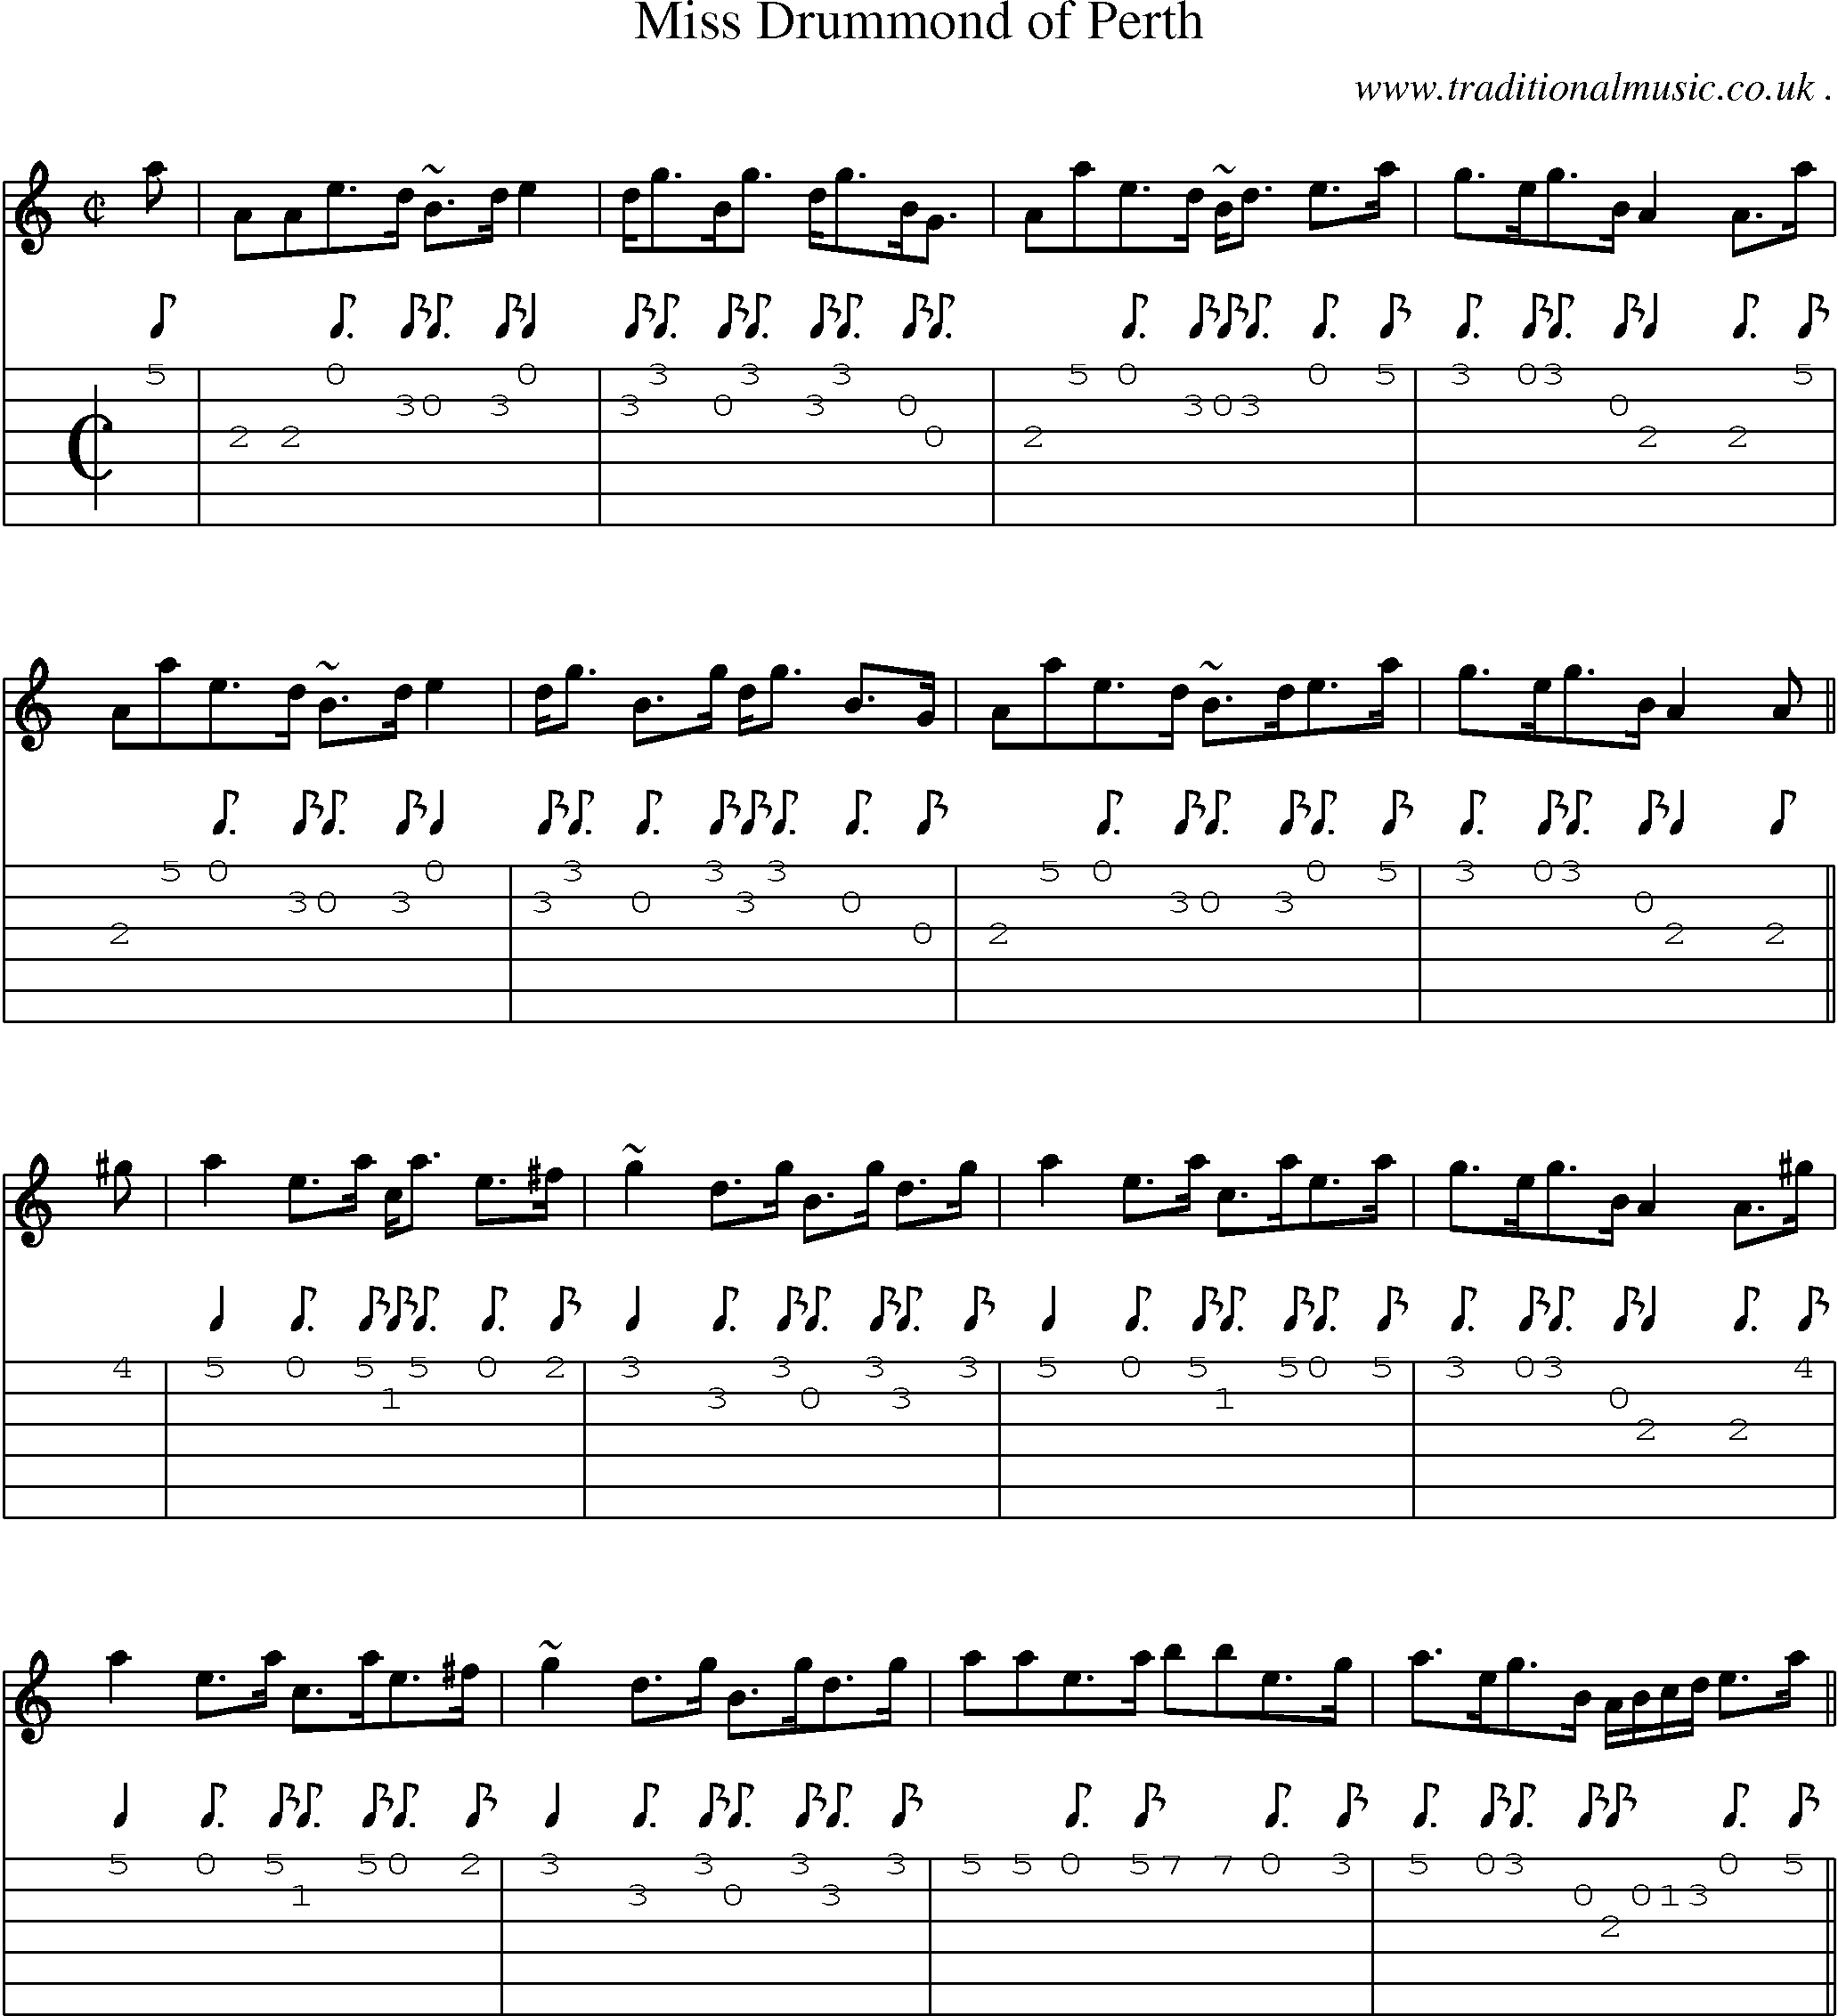 Sheet-music  score, Chords and Guitar Tabs for Miss Drummond Of Perth 